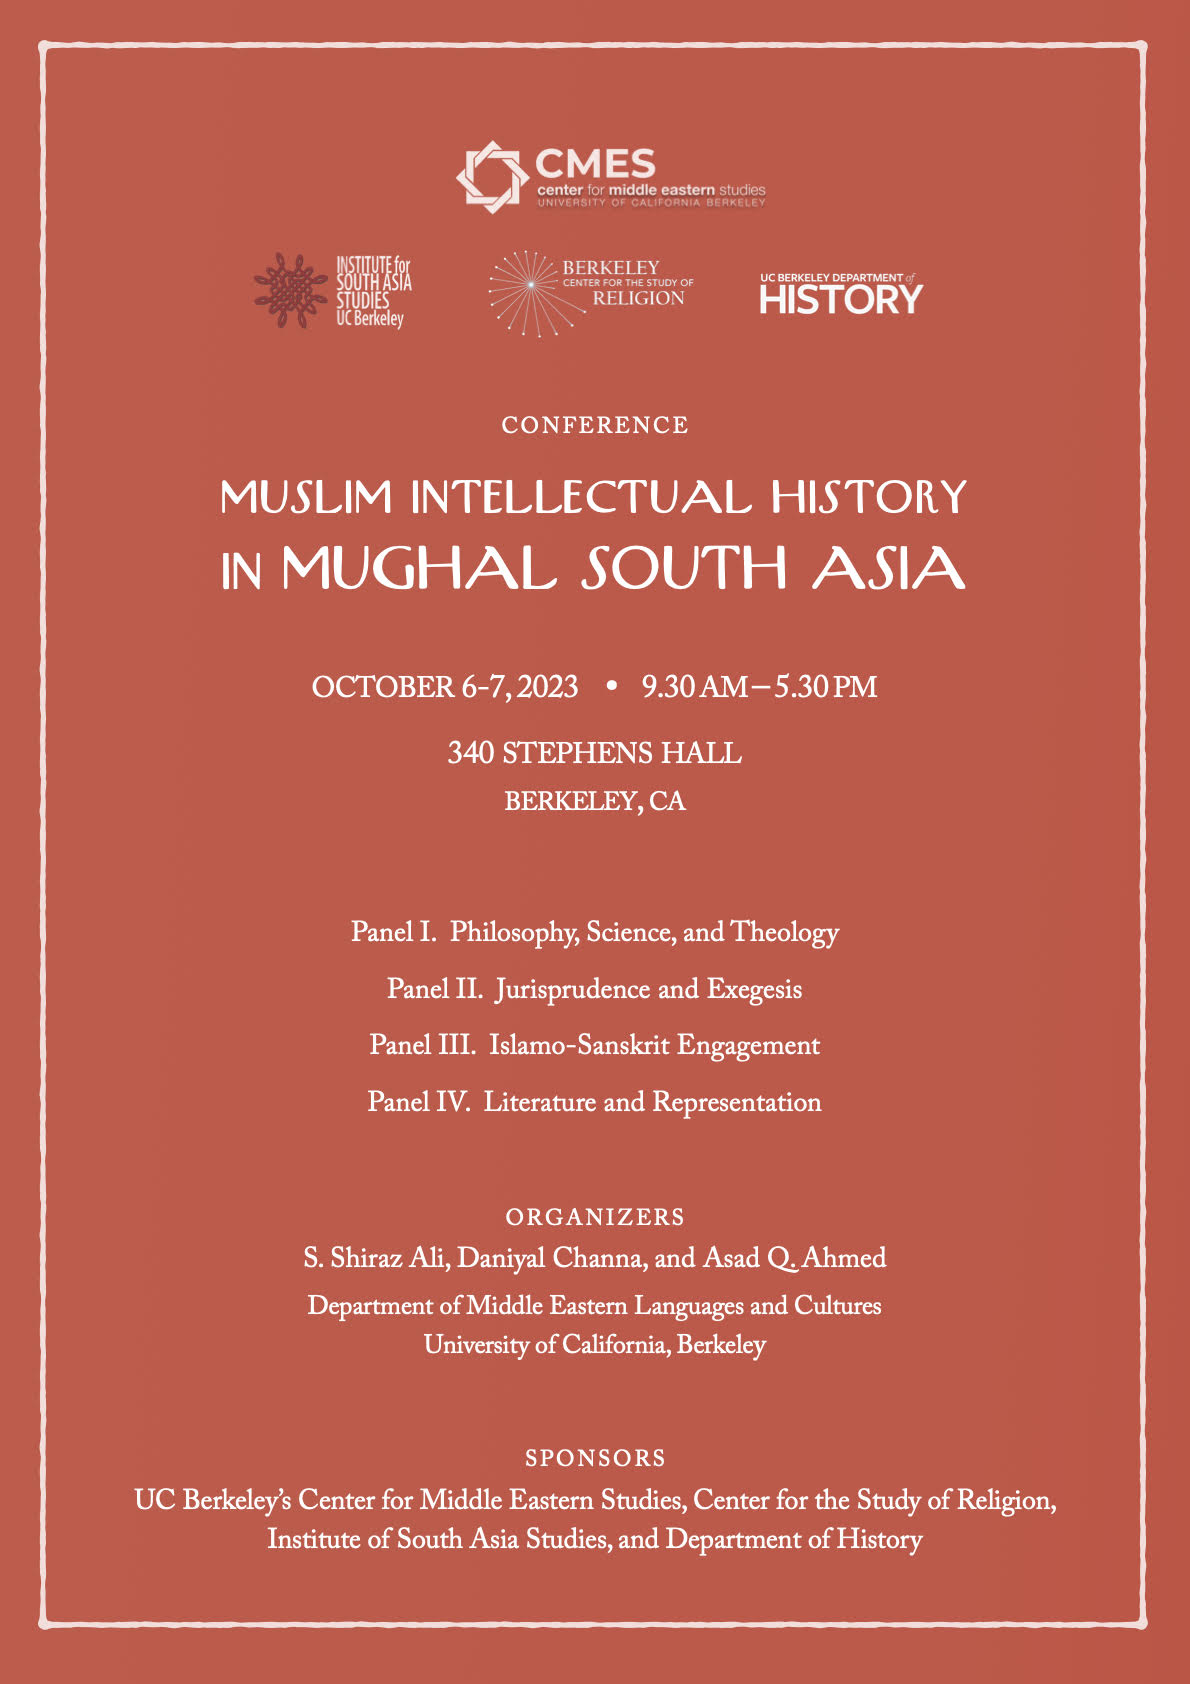 Muslim Intellectual History in Mughal South Asia